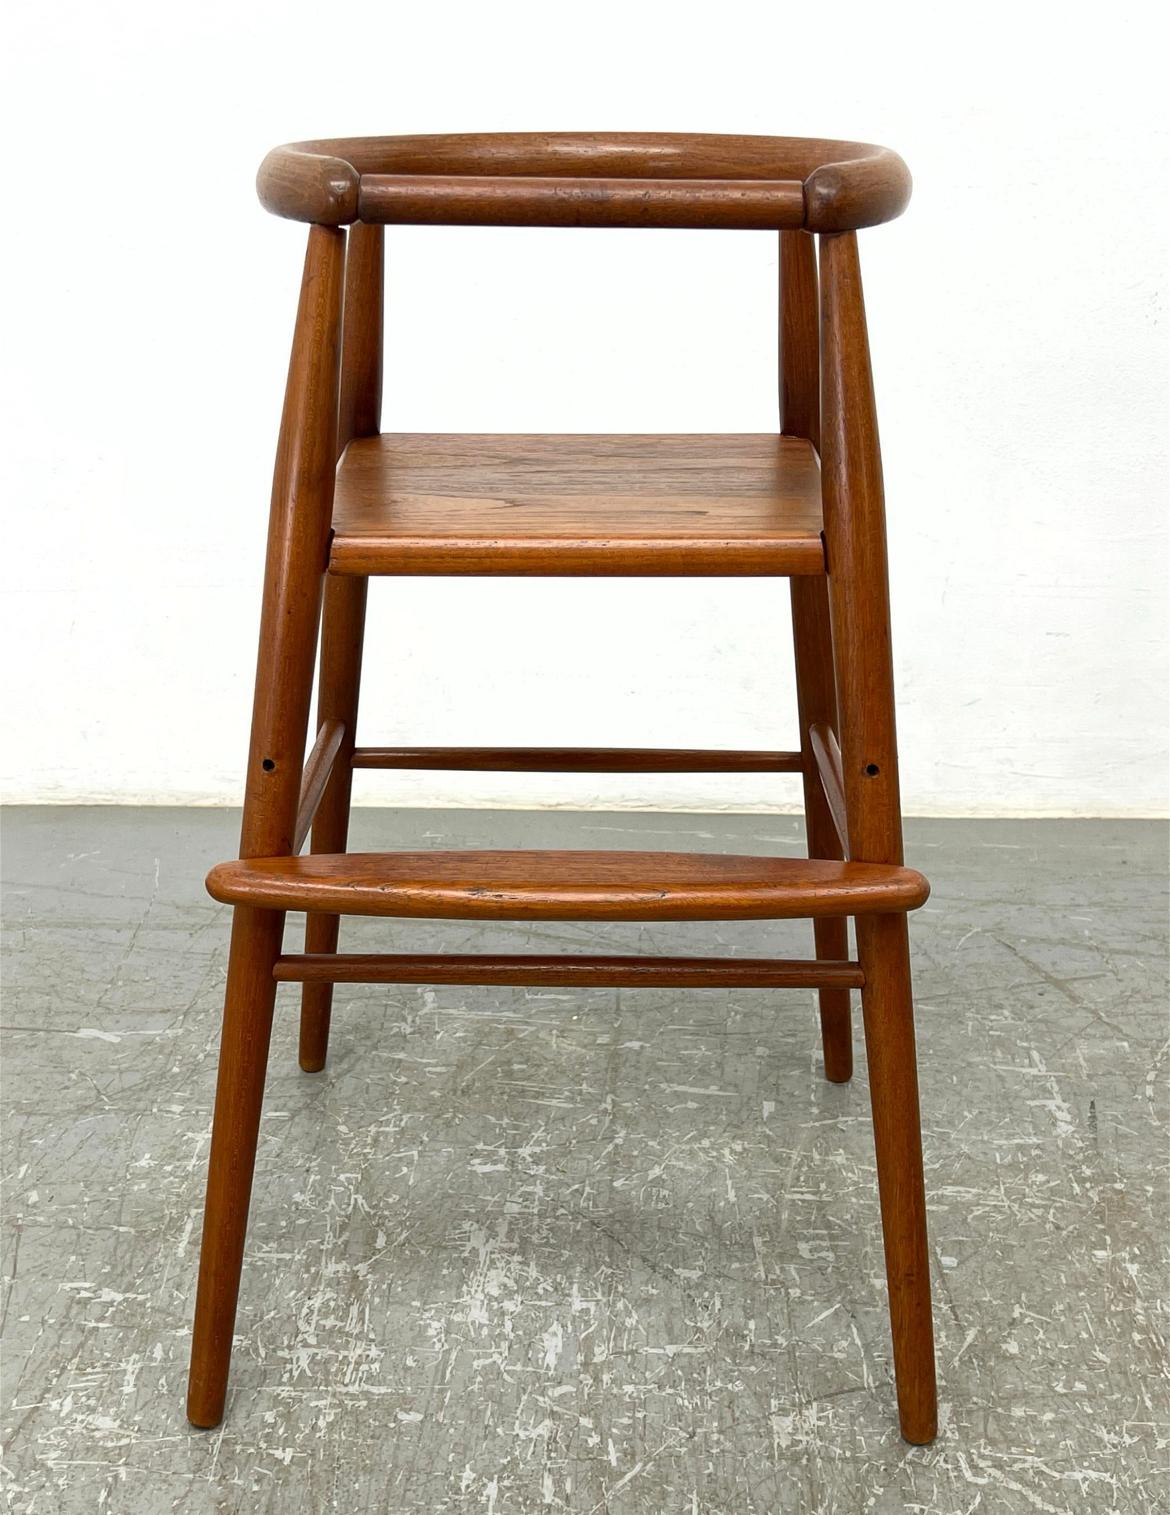 Nanna Ditzel teak Childs high chair stool Danish Mid-Century Modern. Solid teak wood. Has removable front teak bar. Made in Denmark. Beautiful design. Circa 1960 has original label - located in Brooklyn NYC.

Dimensions: H: 28 inches: W: 16 inches: